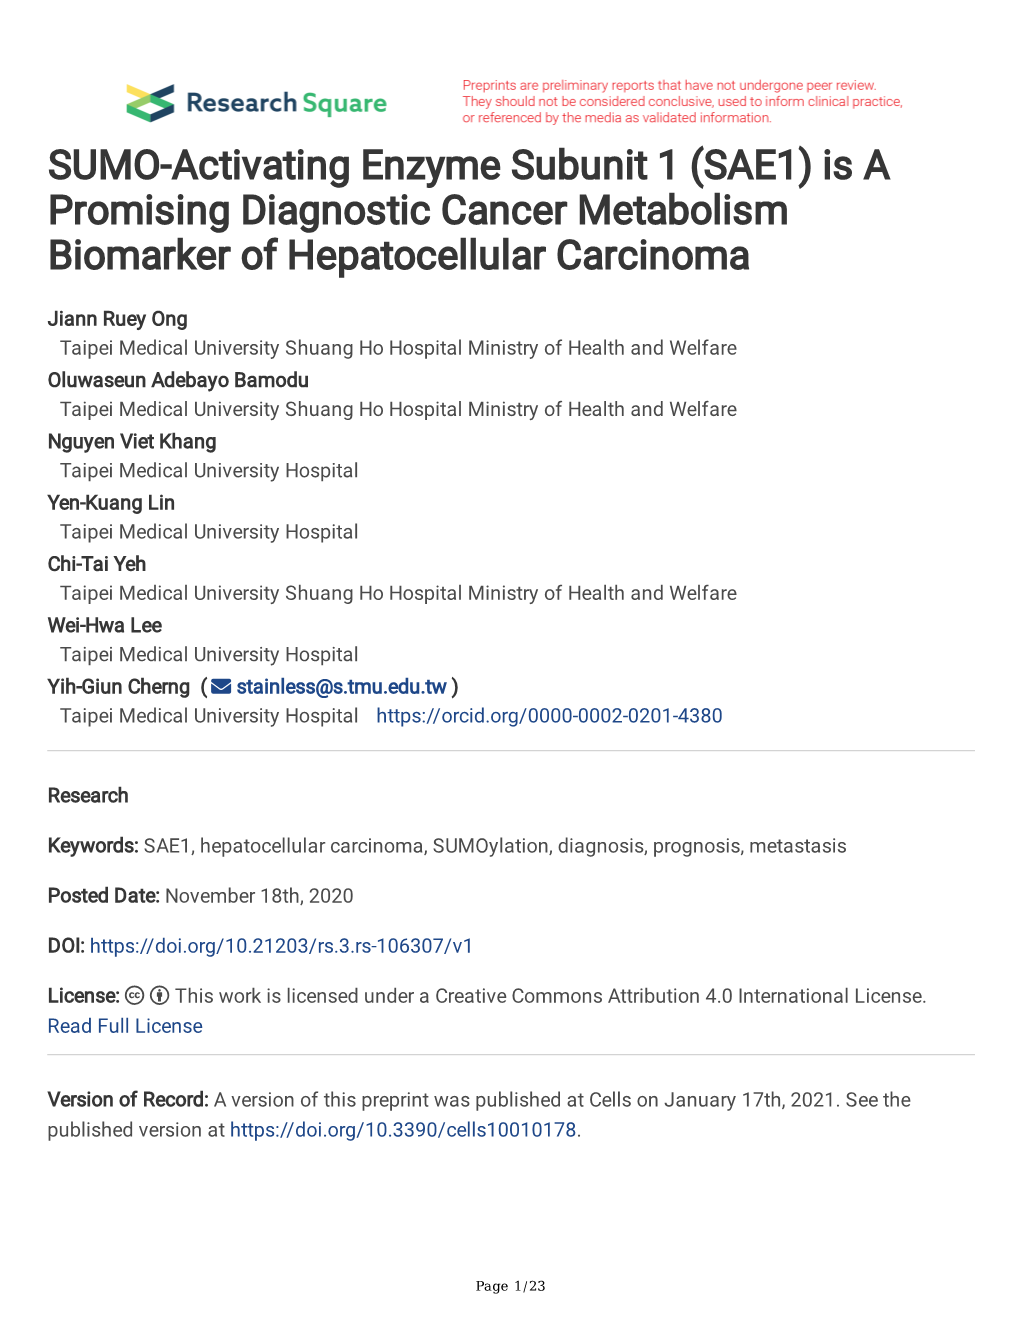 SAE1) Is a Promising Diagnostic Cancer Metabolism Biomarker of Hepatocellular Carcinoma